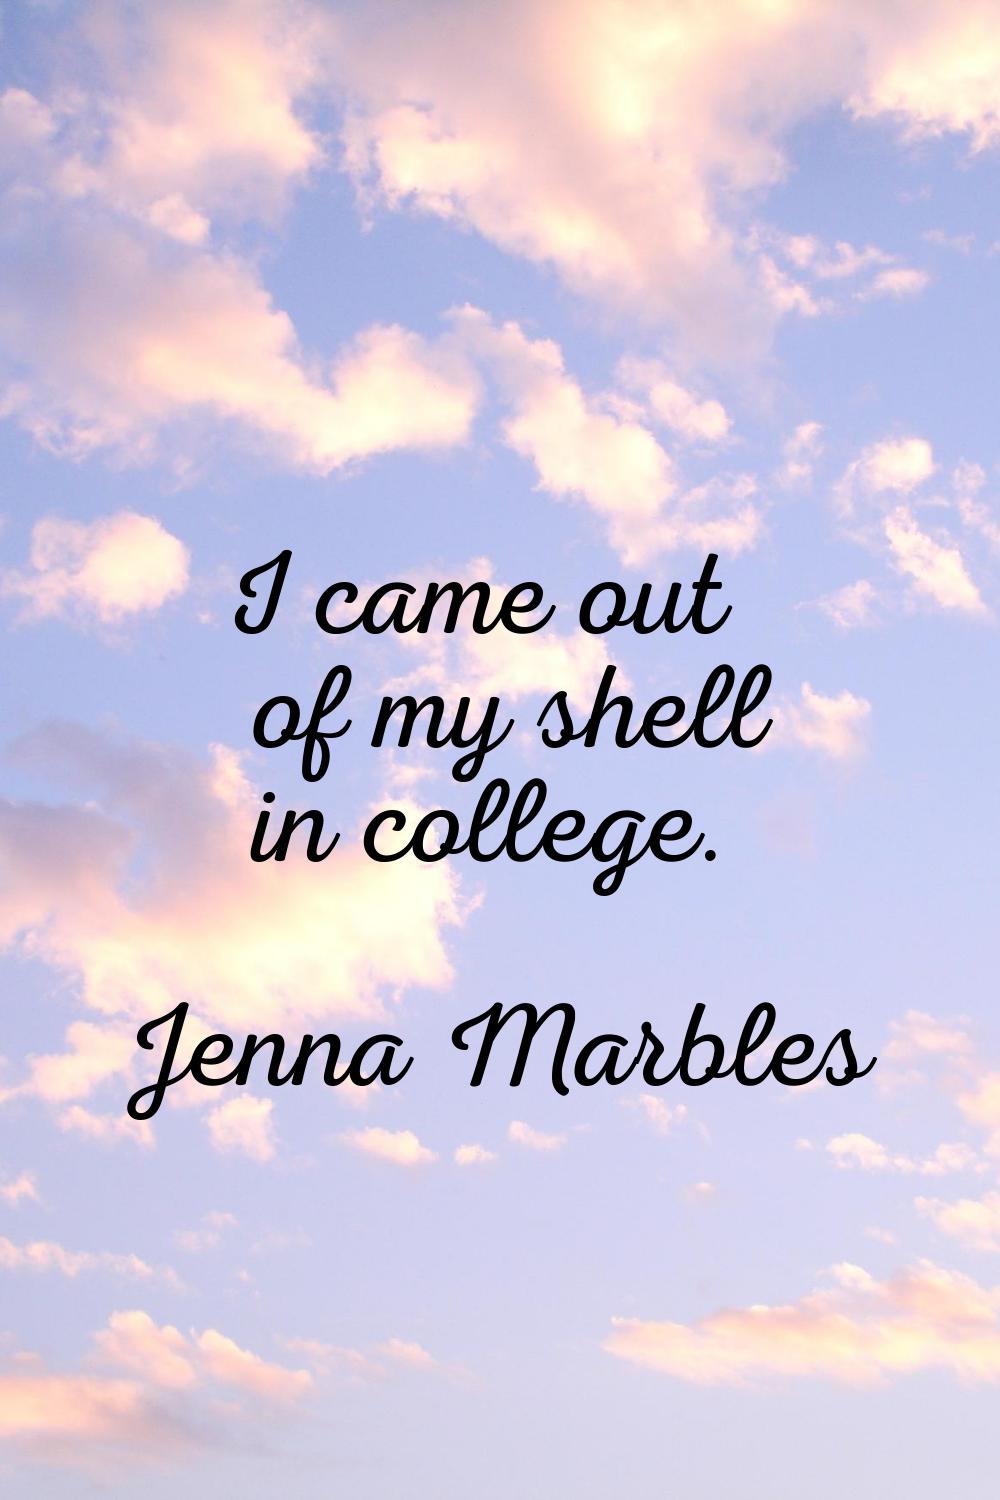 I came out of my shell in college.